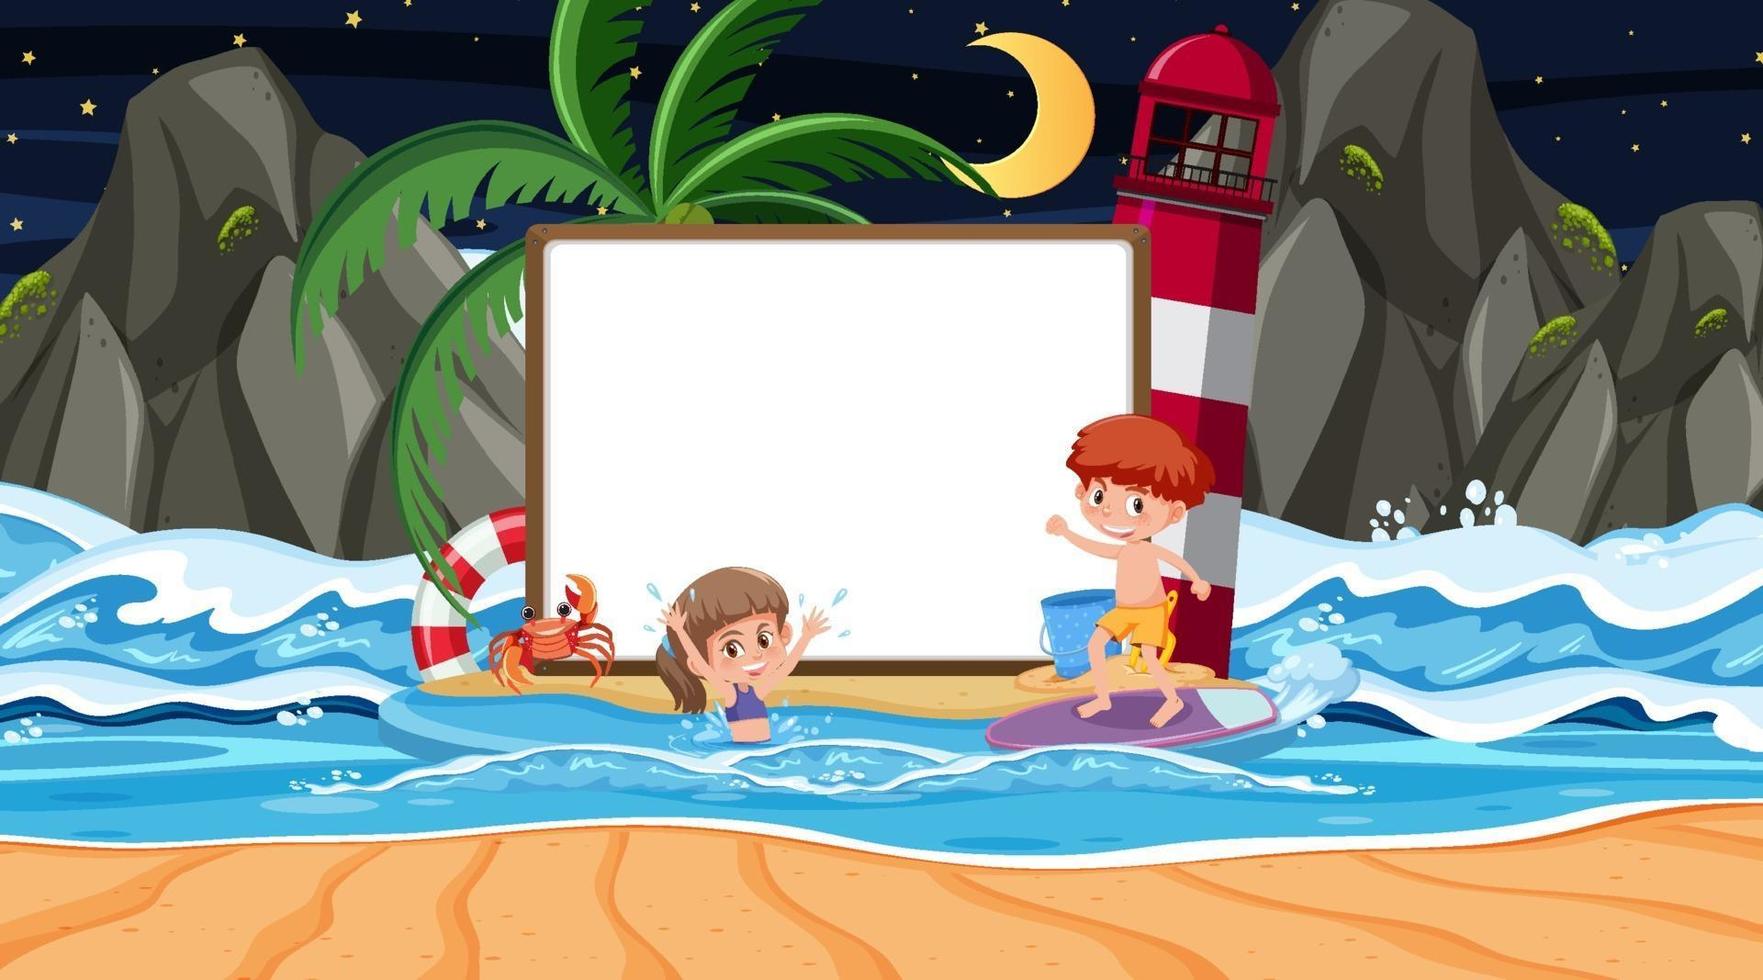 Kids on summer vacation at the beach night scene with an empty banner vector